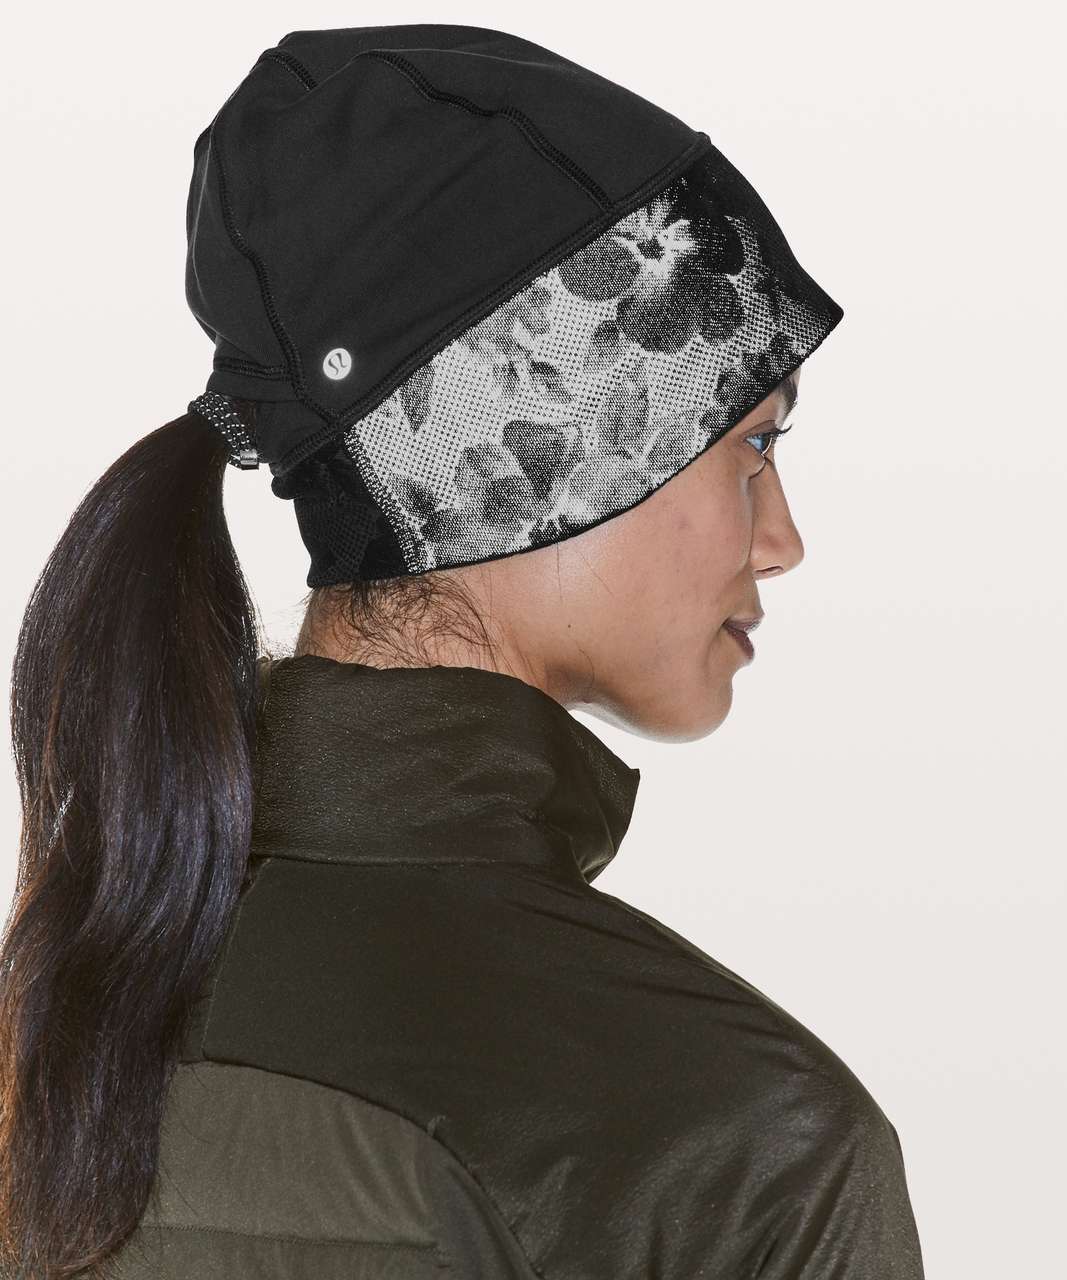 Lululemon Forget The Shivers Beanie - Black / Silver Reflective